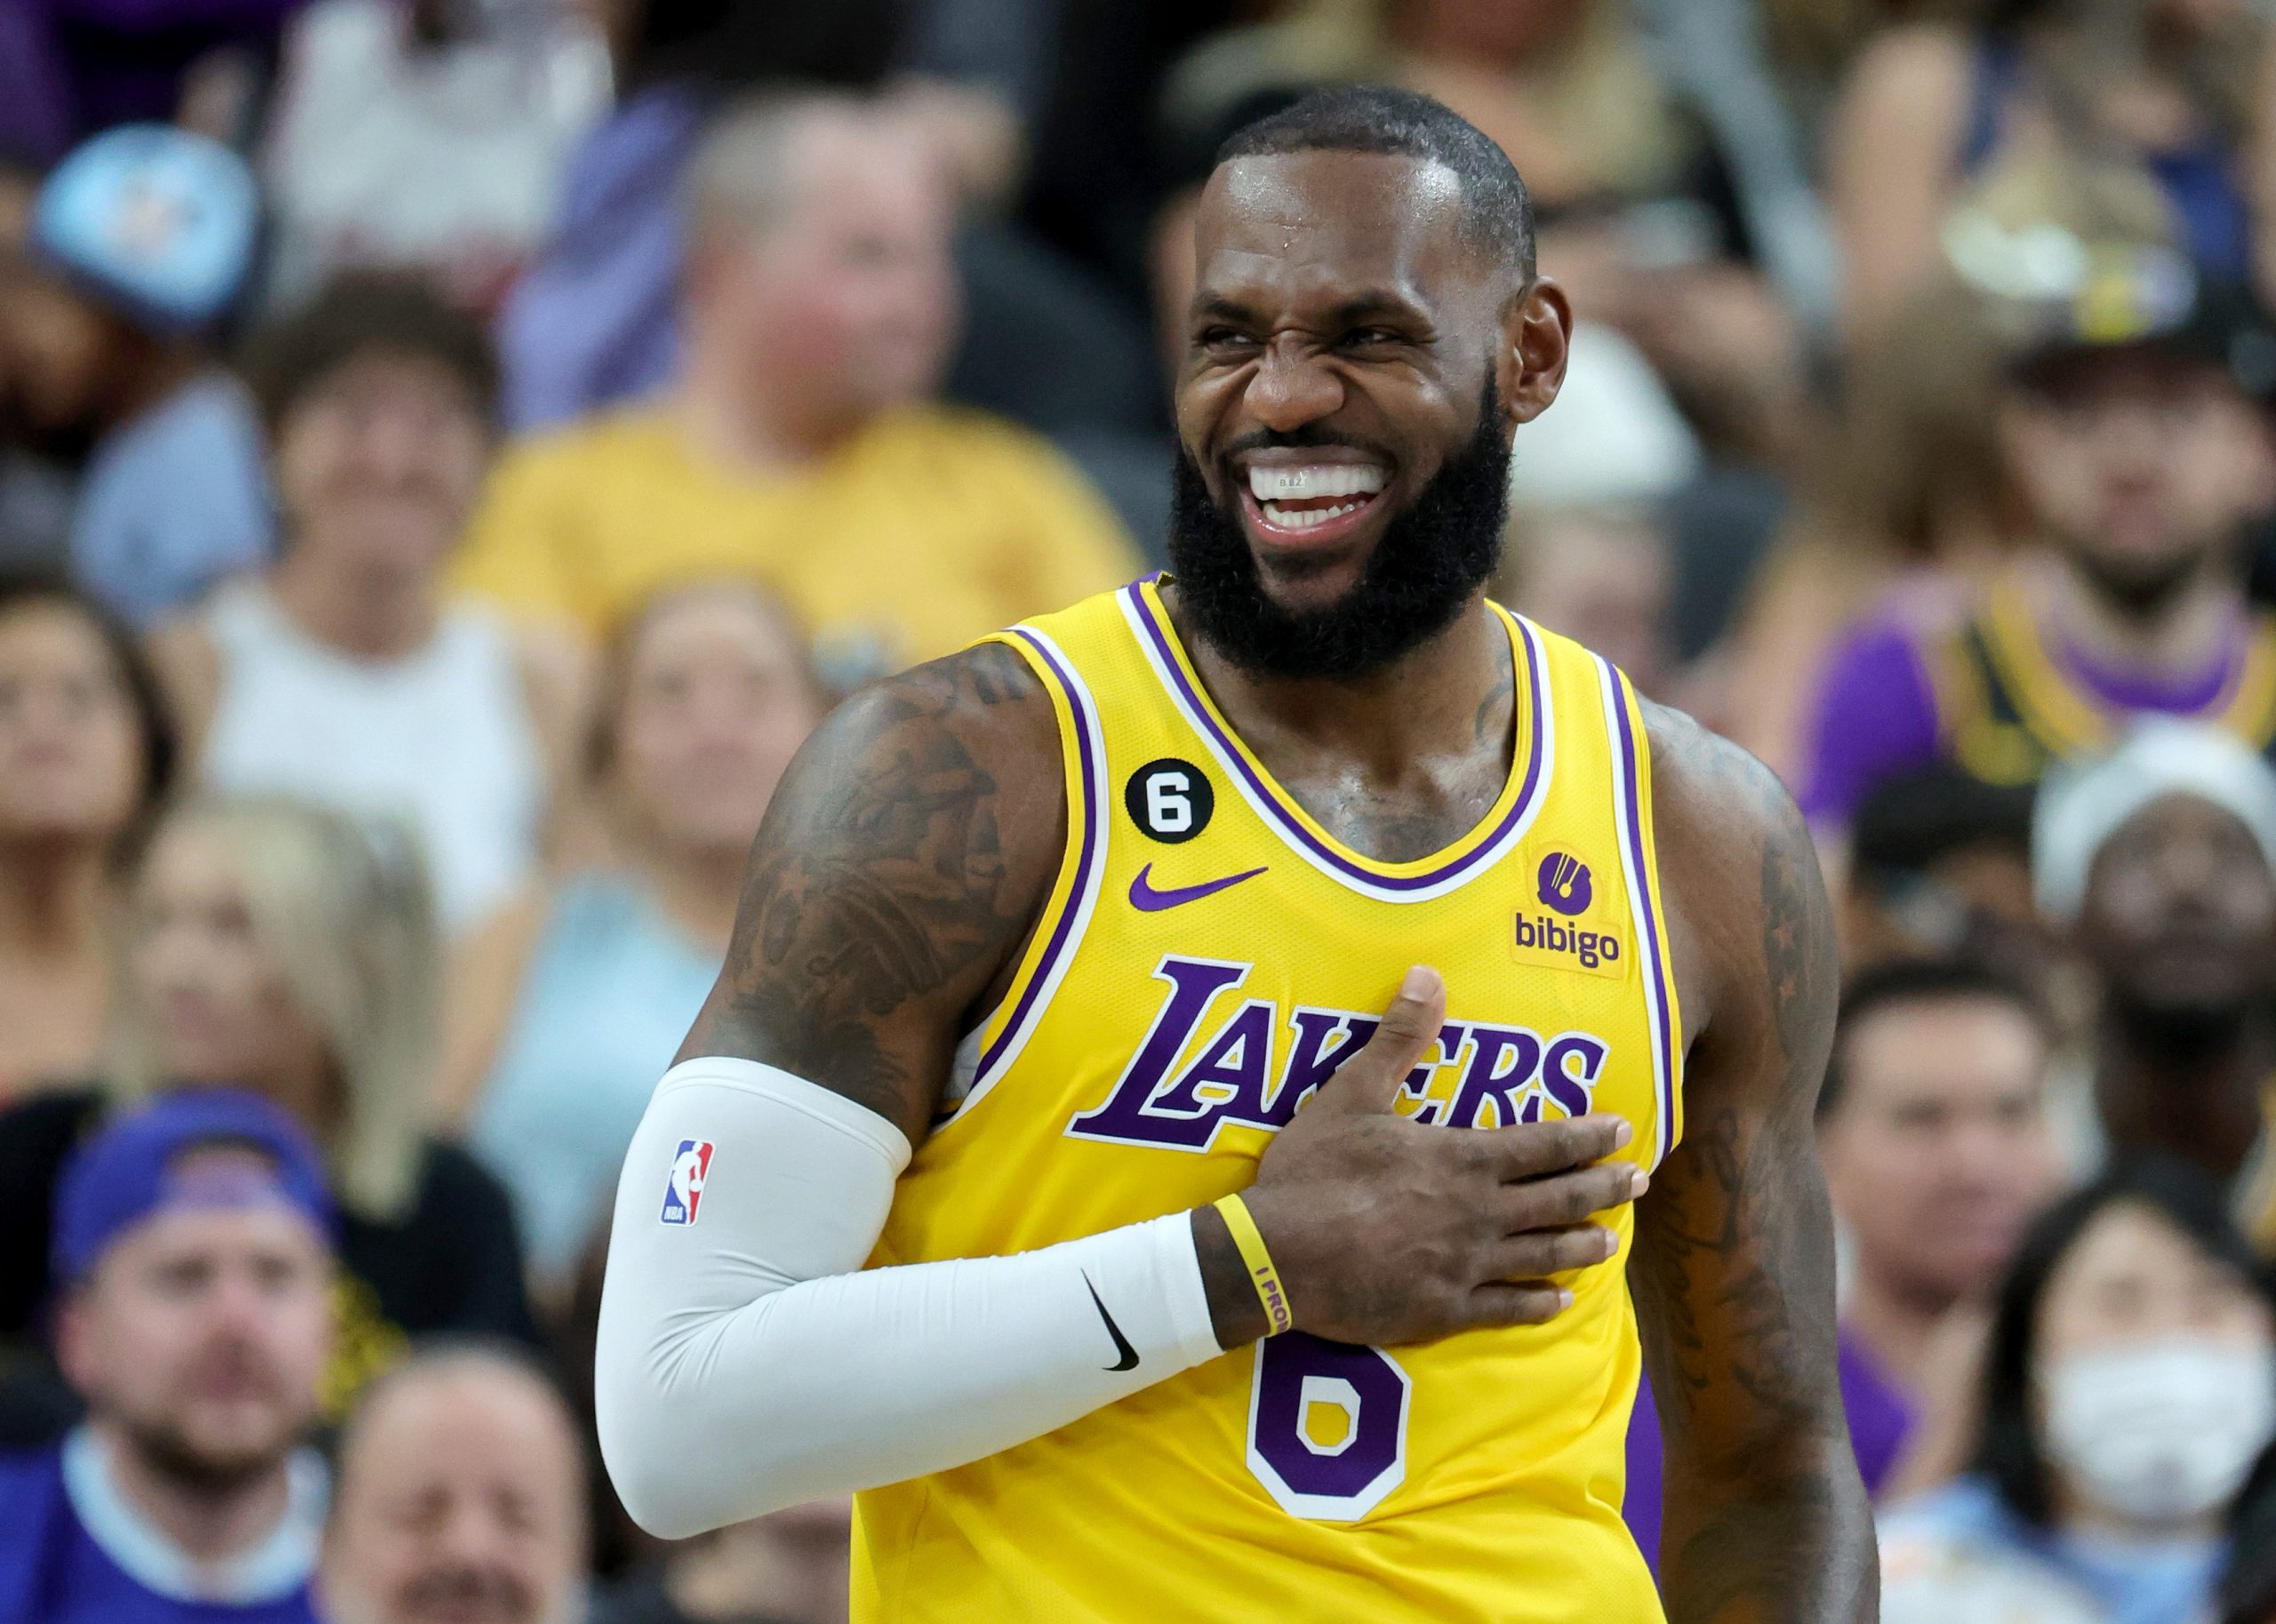 LeBron James pushes his agenda of owning an NBA team in Las Vegas